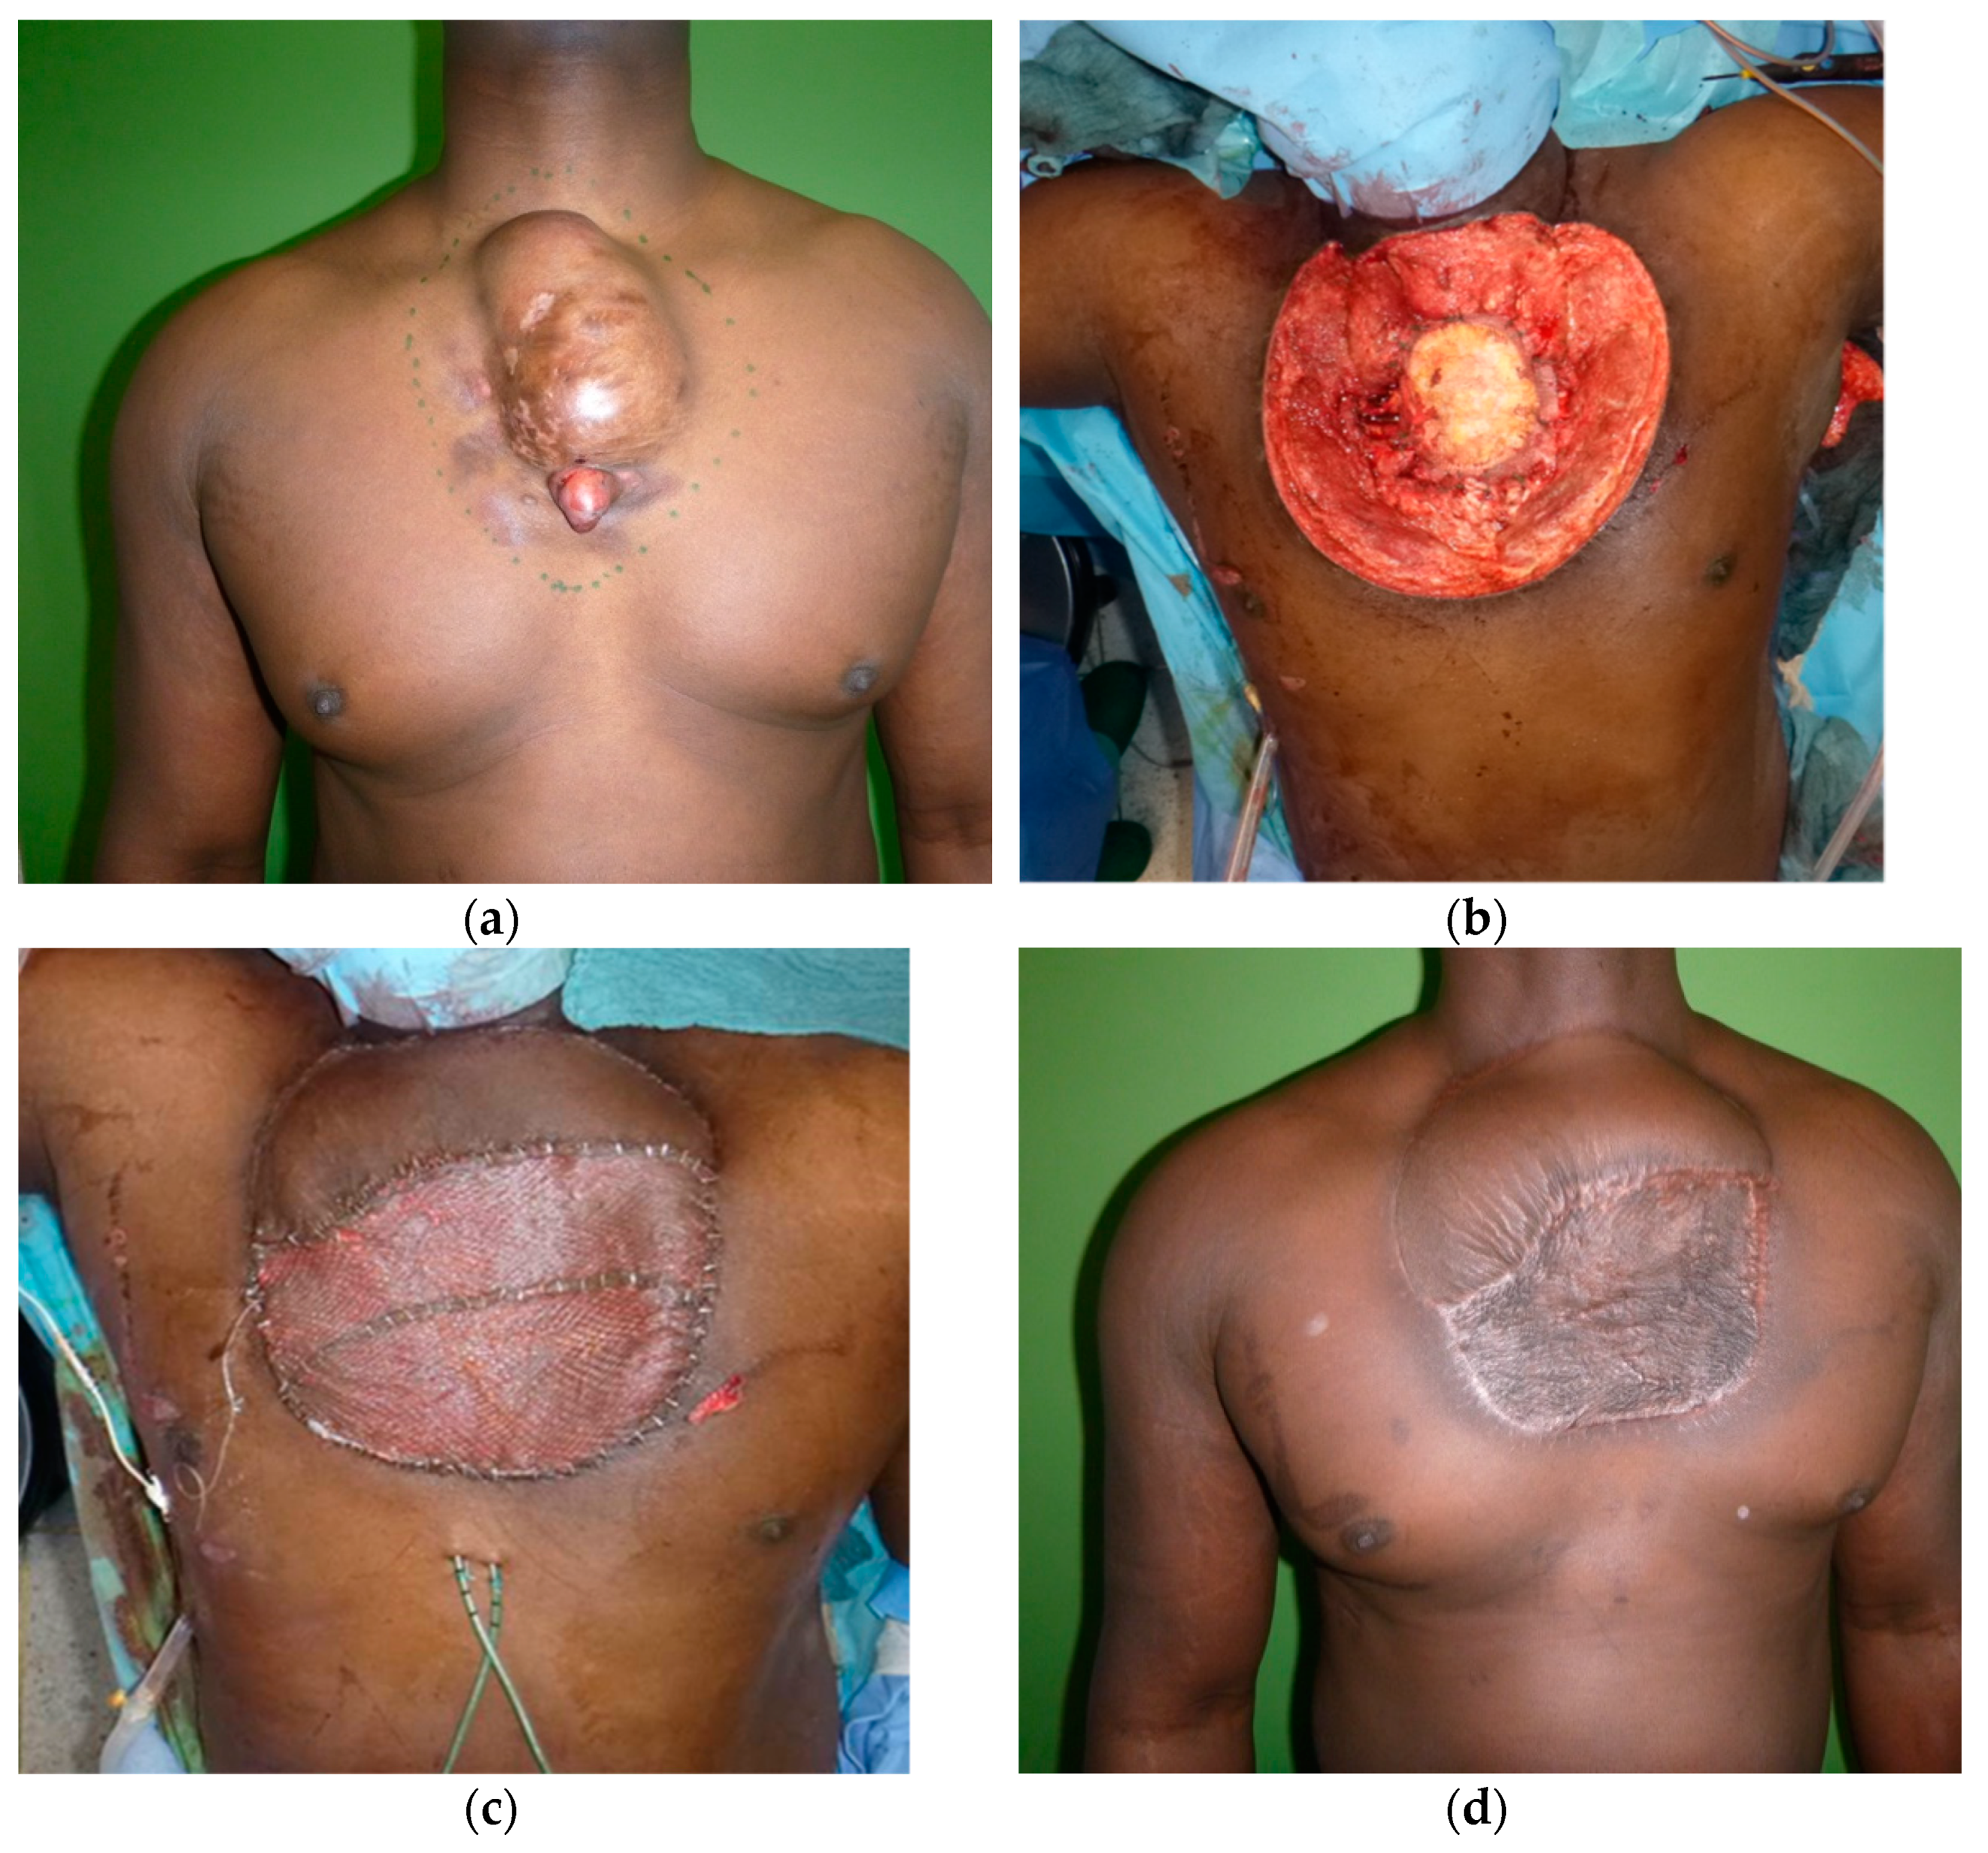 Widespread Tender Hemorrhagic Patches on the Breast